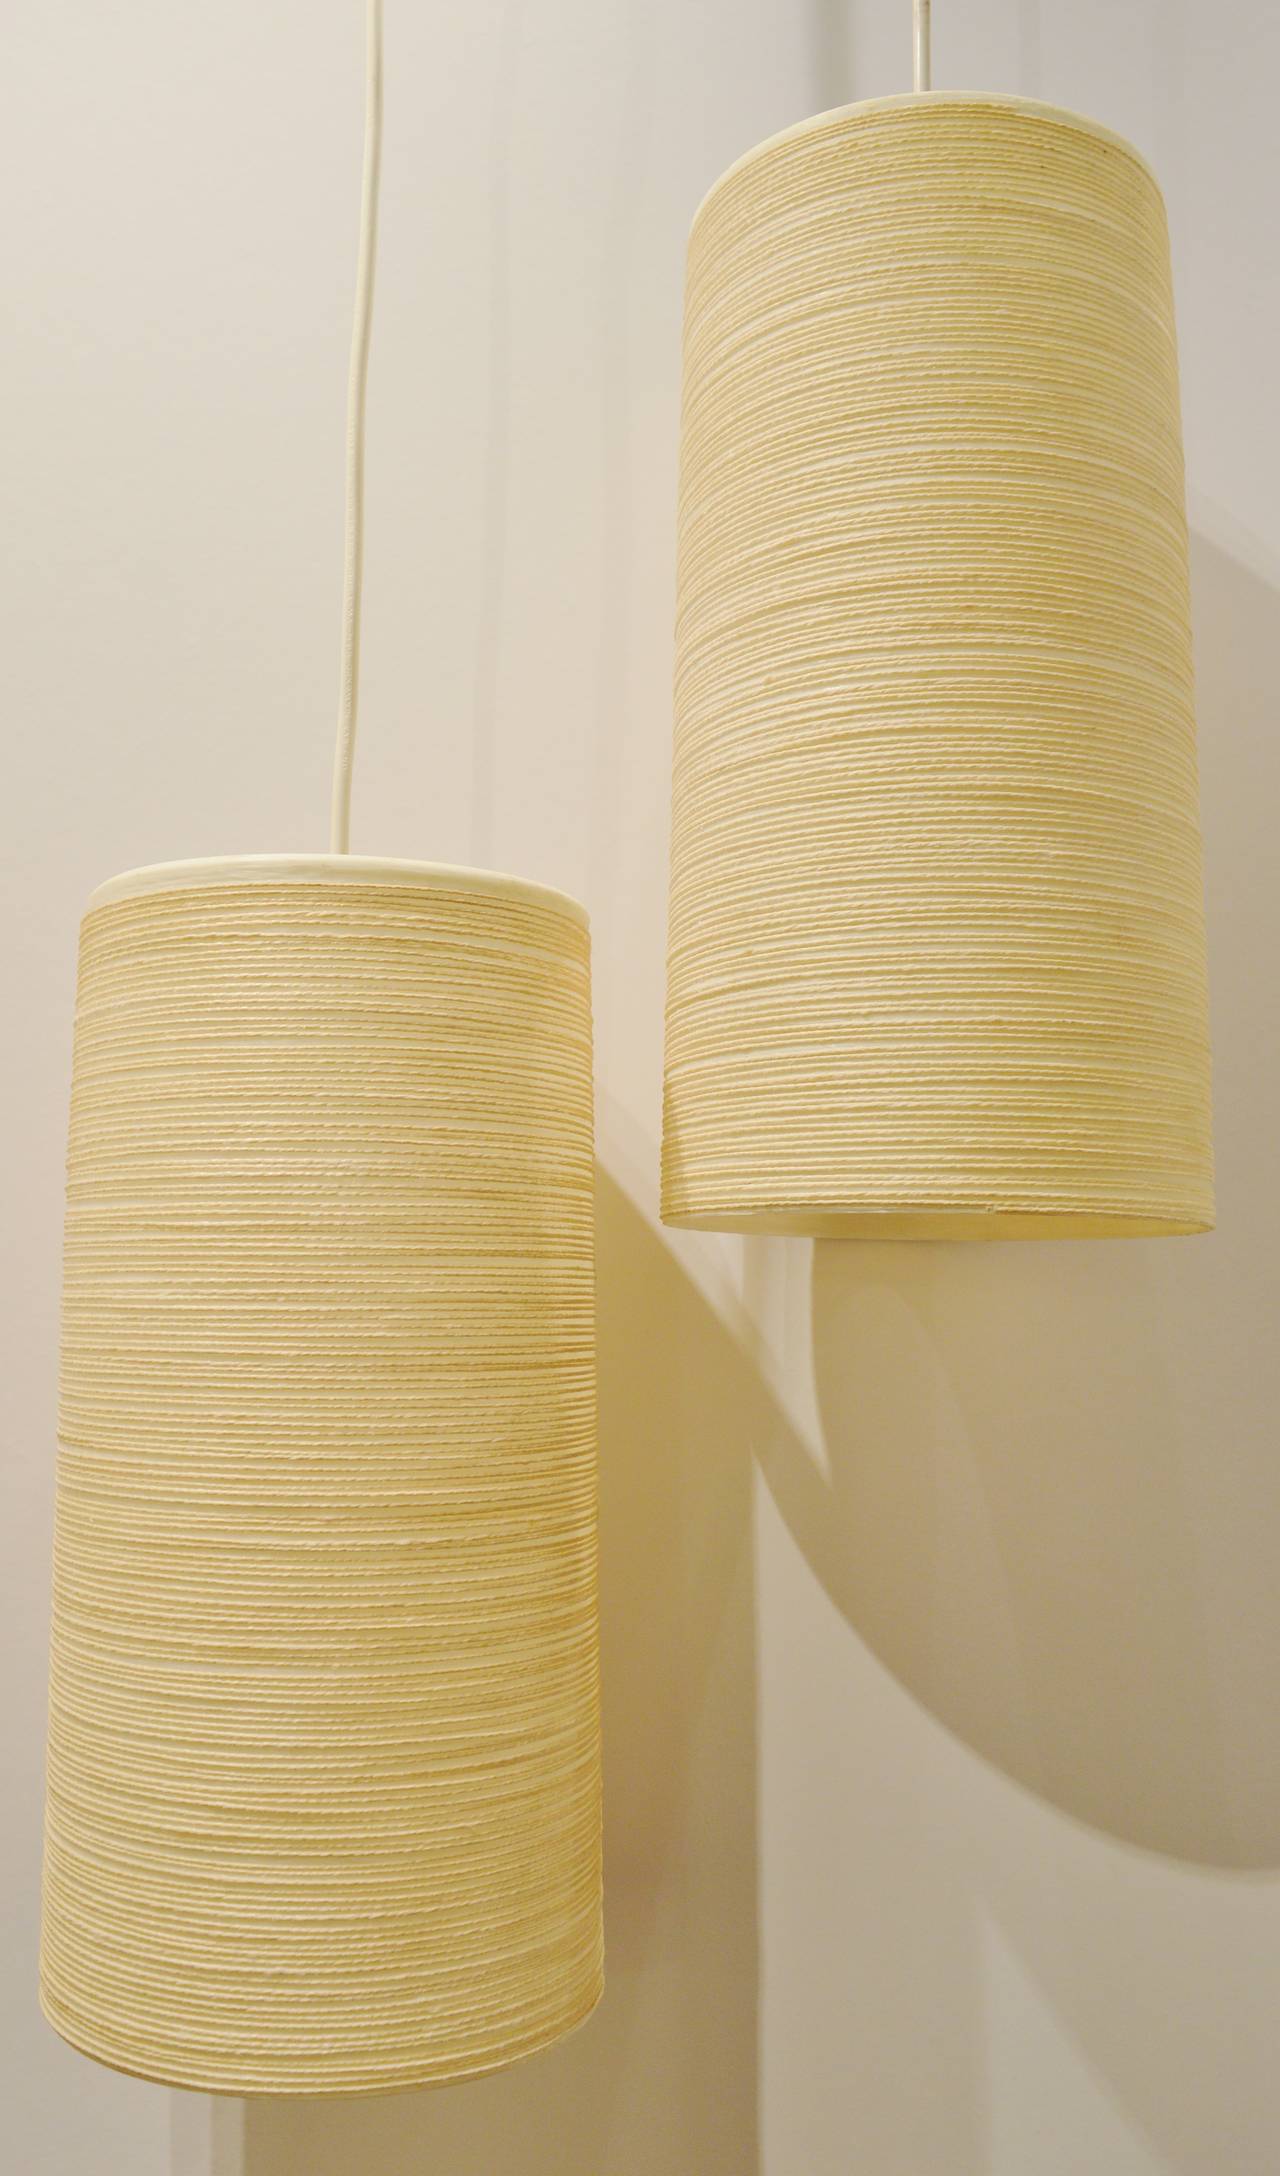 This stellar pair of Danish Modern organic cylinder swag lights are by Lotte & Gunnar Bostlund, Danes who moved their business to Ontario, Canada. Their trademark woolen thread applied around the outside and the inner fibreglass shell shade give off